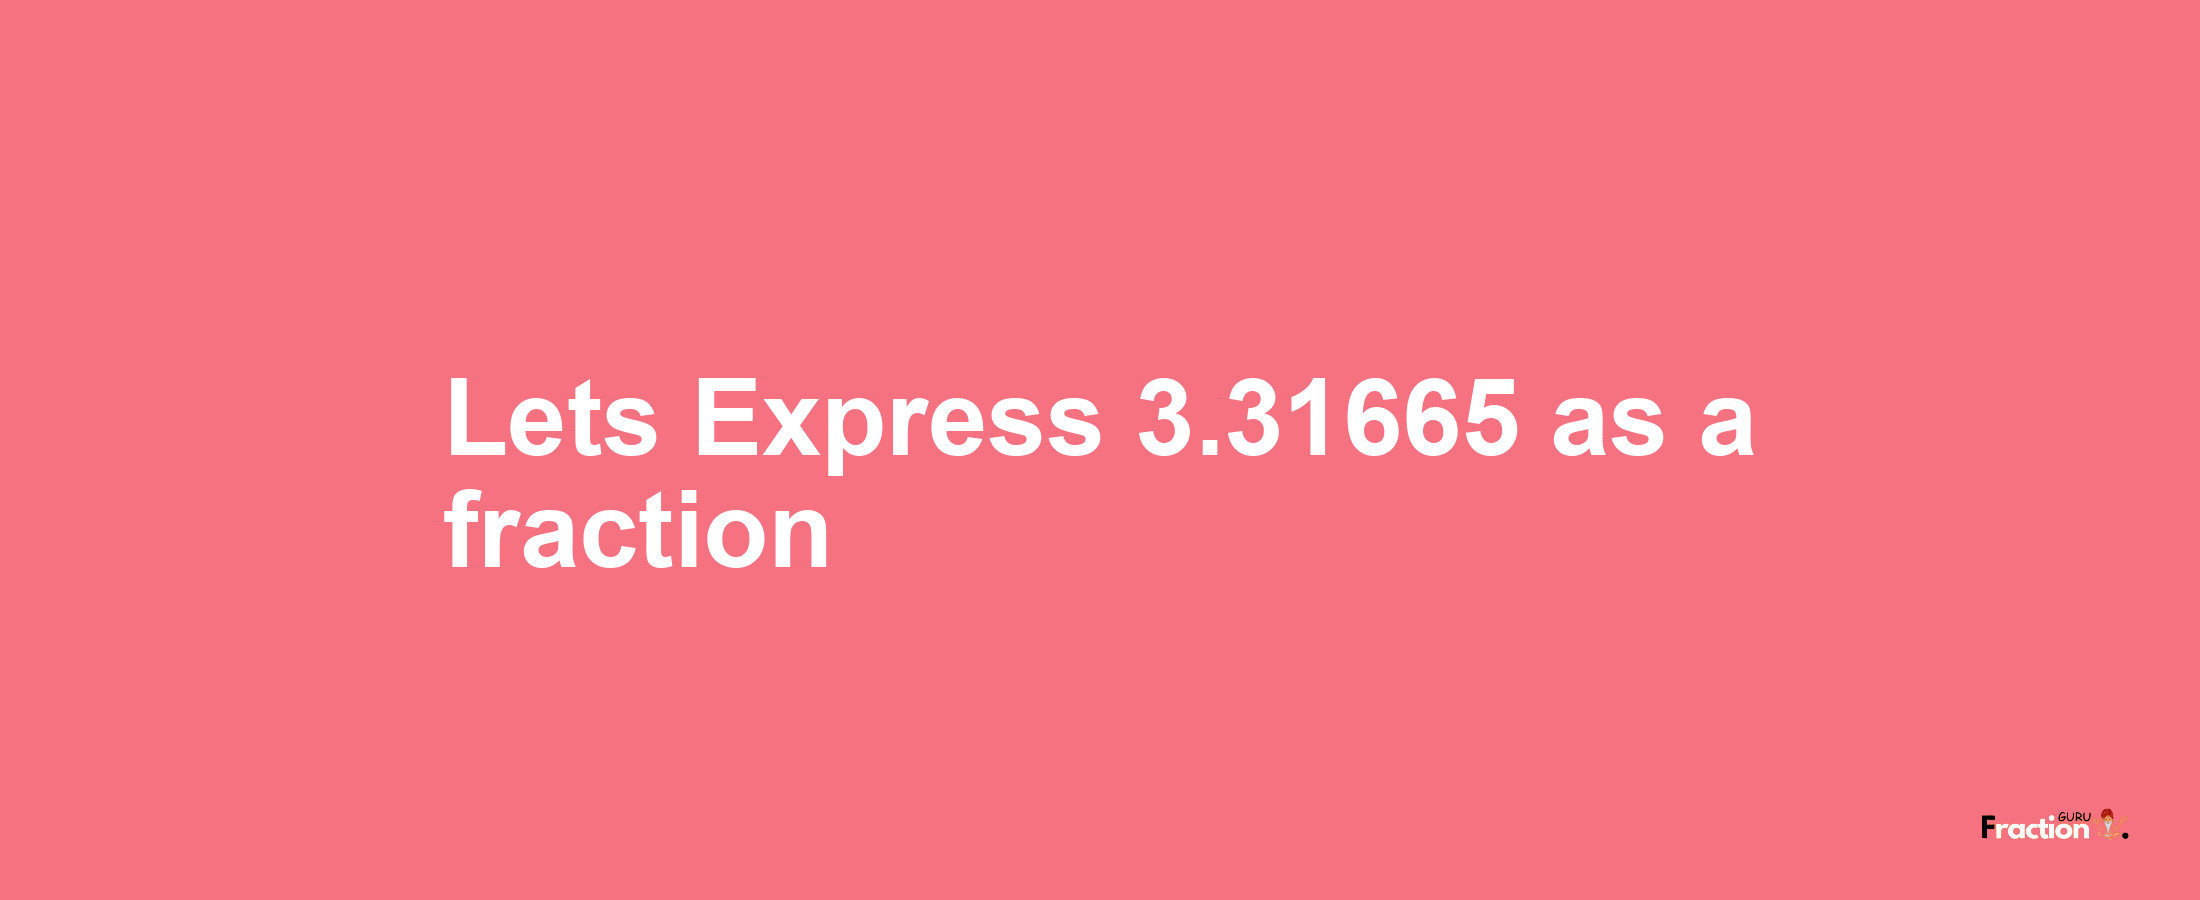 Lets Express 3.31665 as afraction